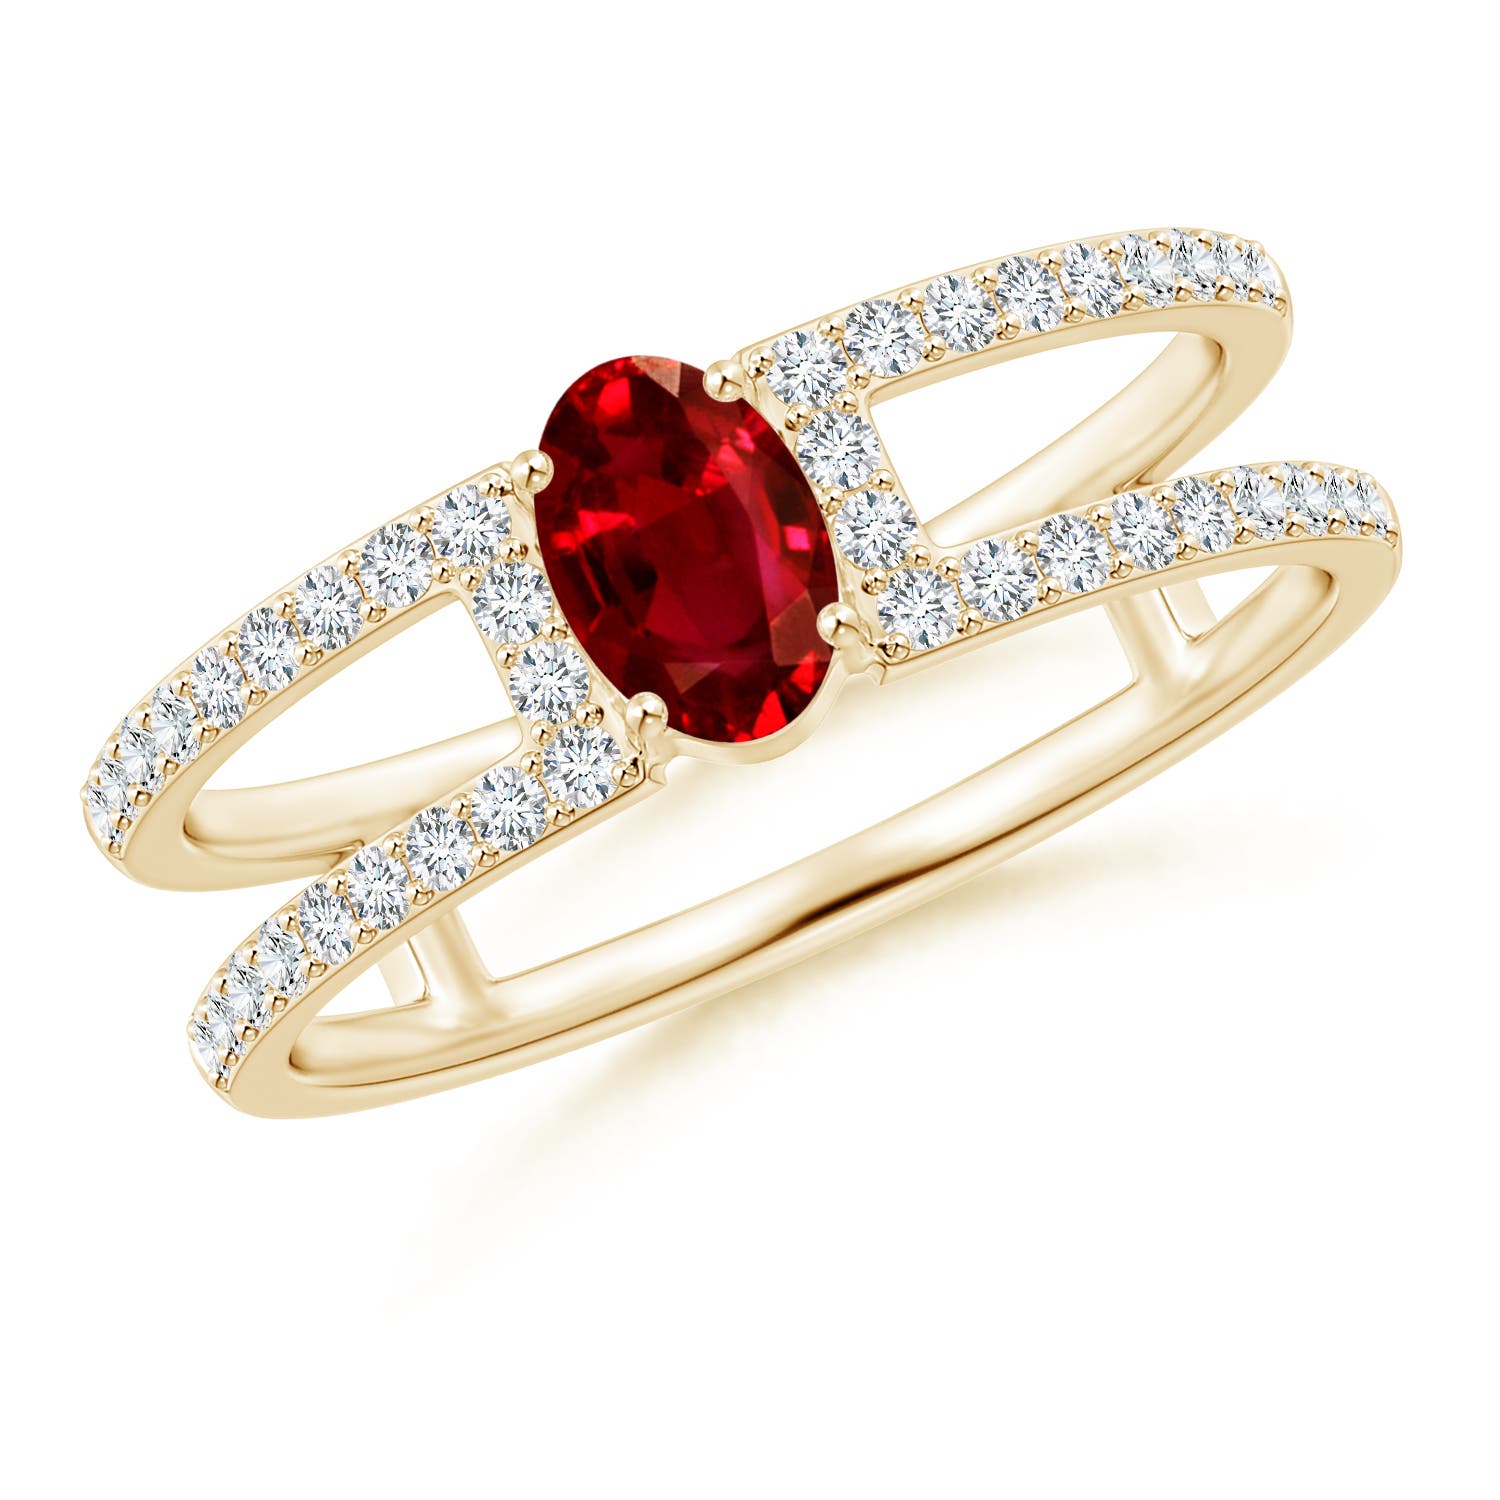 Ladies 14K Engagement Ring set with 1/2 CT Diamond and Ruby Accents | eBay